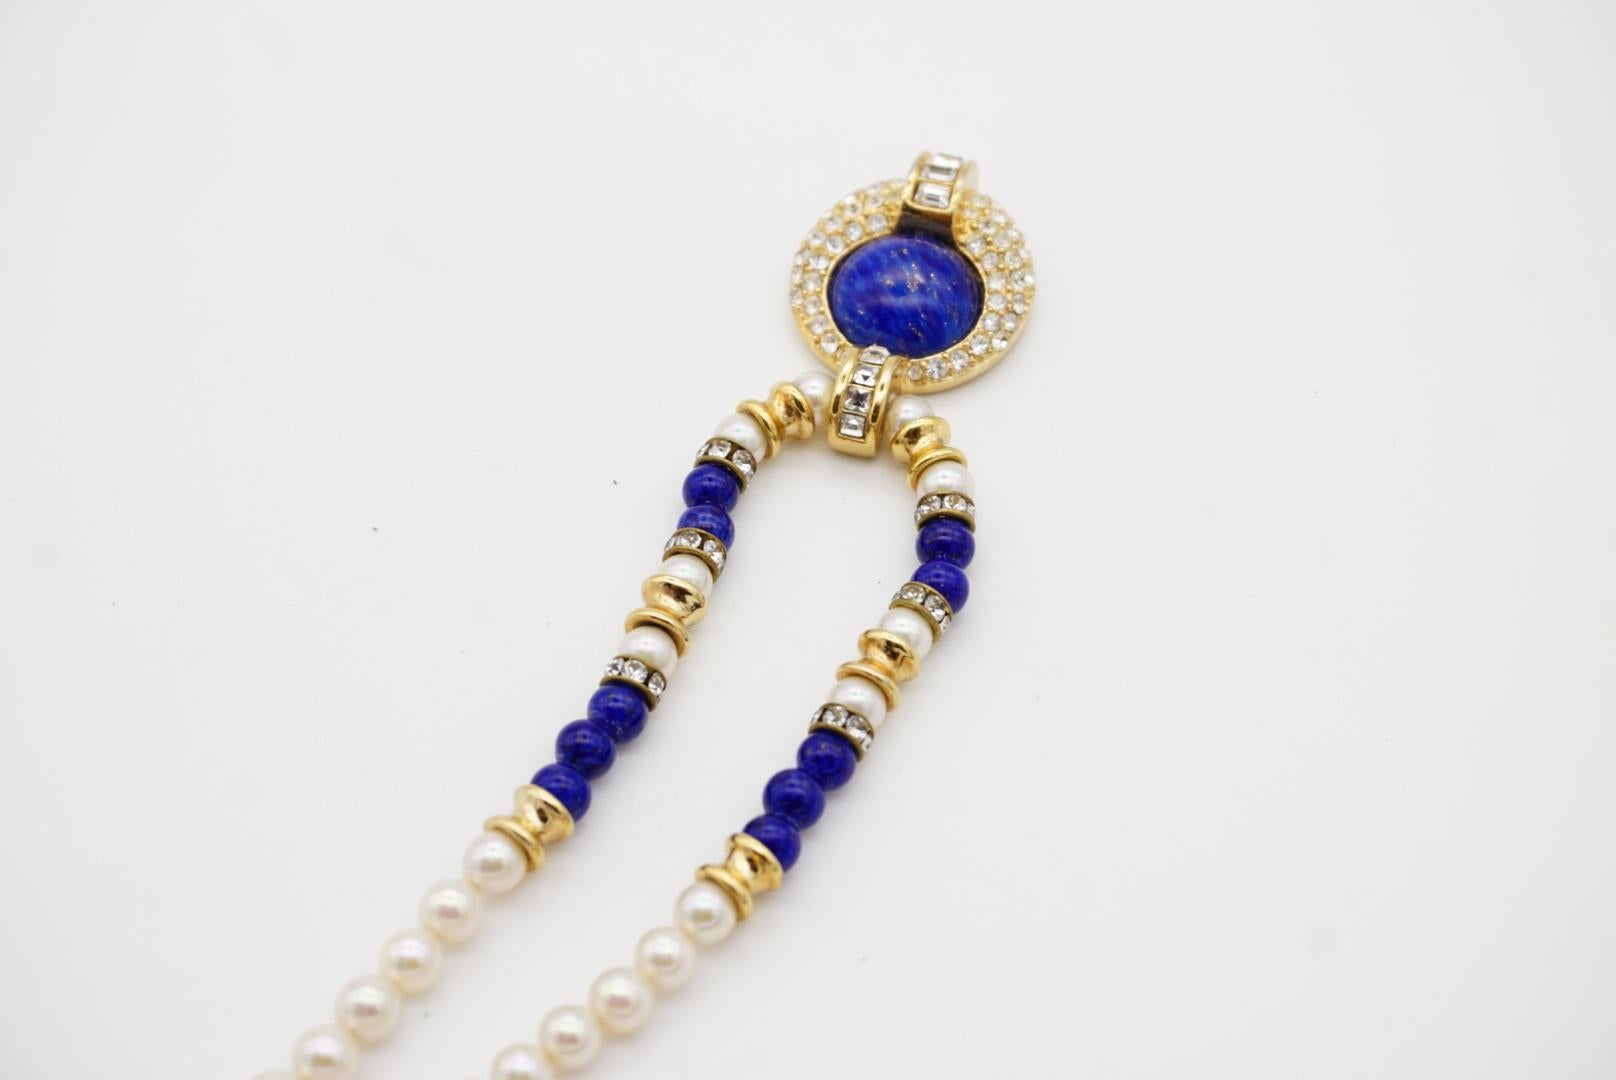 Christian Dior Vintage 1980s White Pearls Lapis Cabochon Crystals Oval Necklace For Sale 7